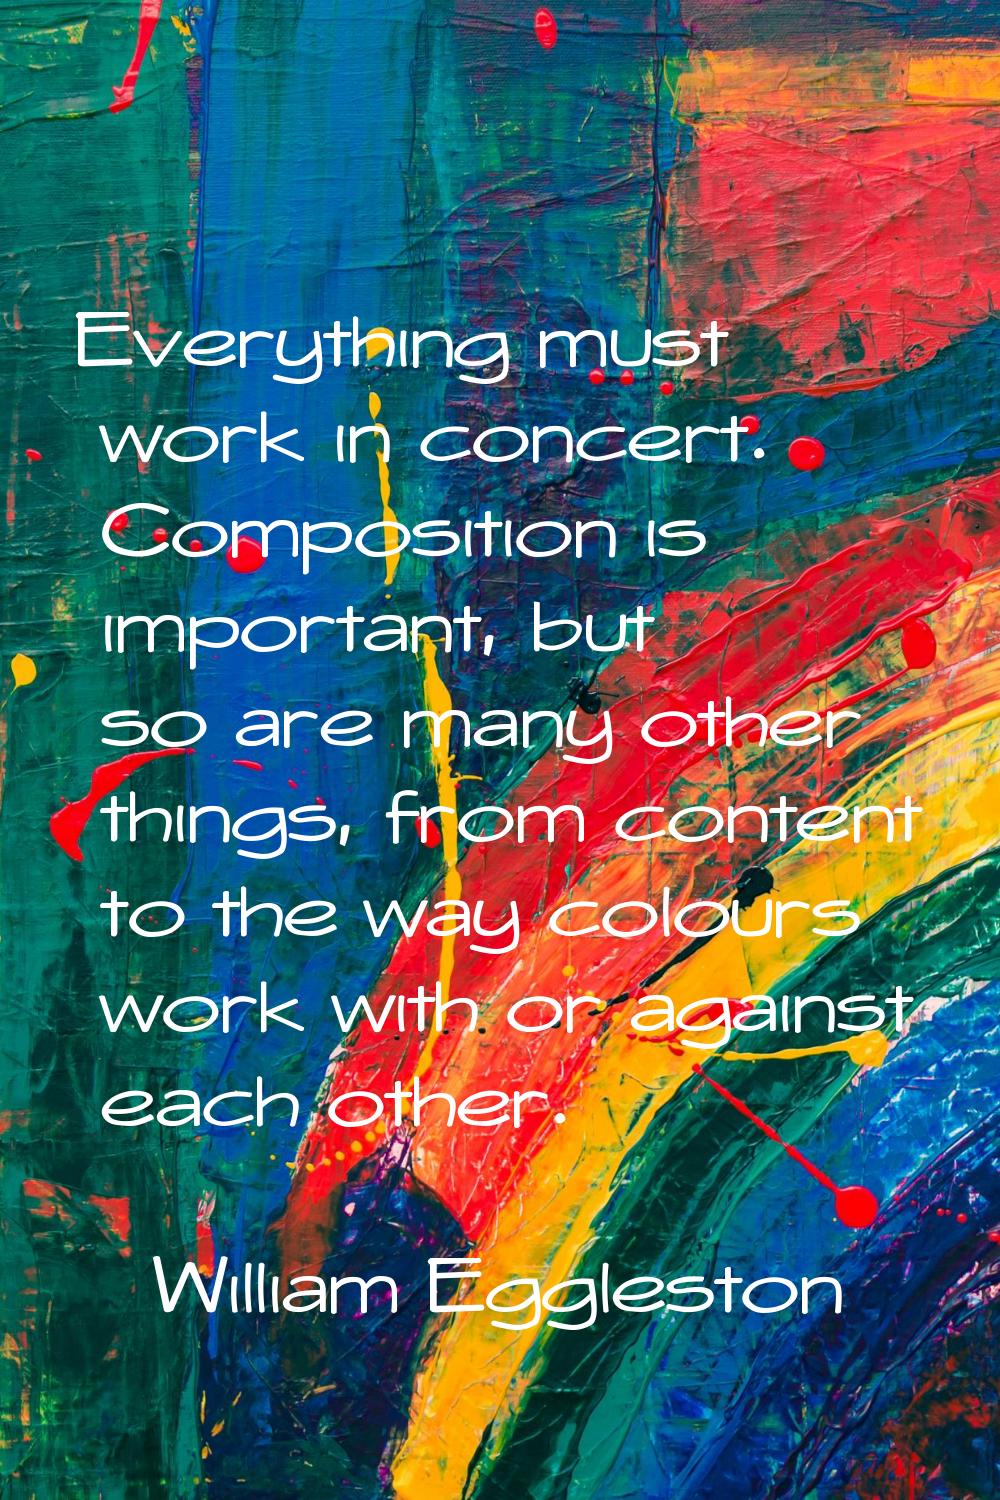 Everything must work in concert. Composition is important, but so are many other things, from conte